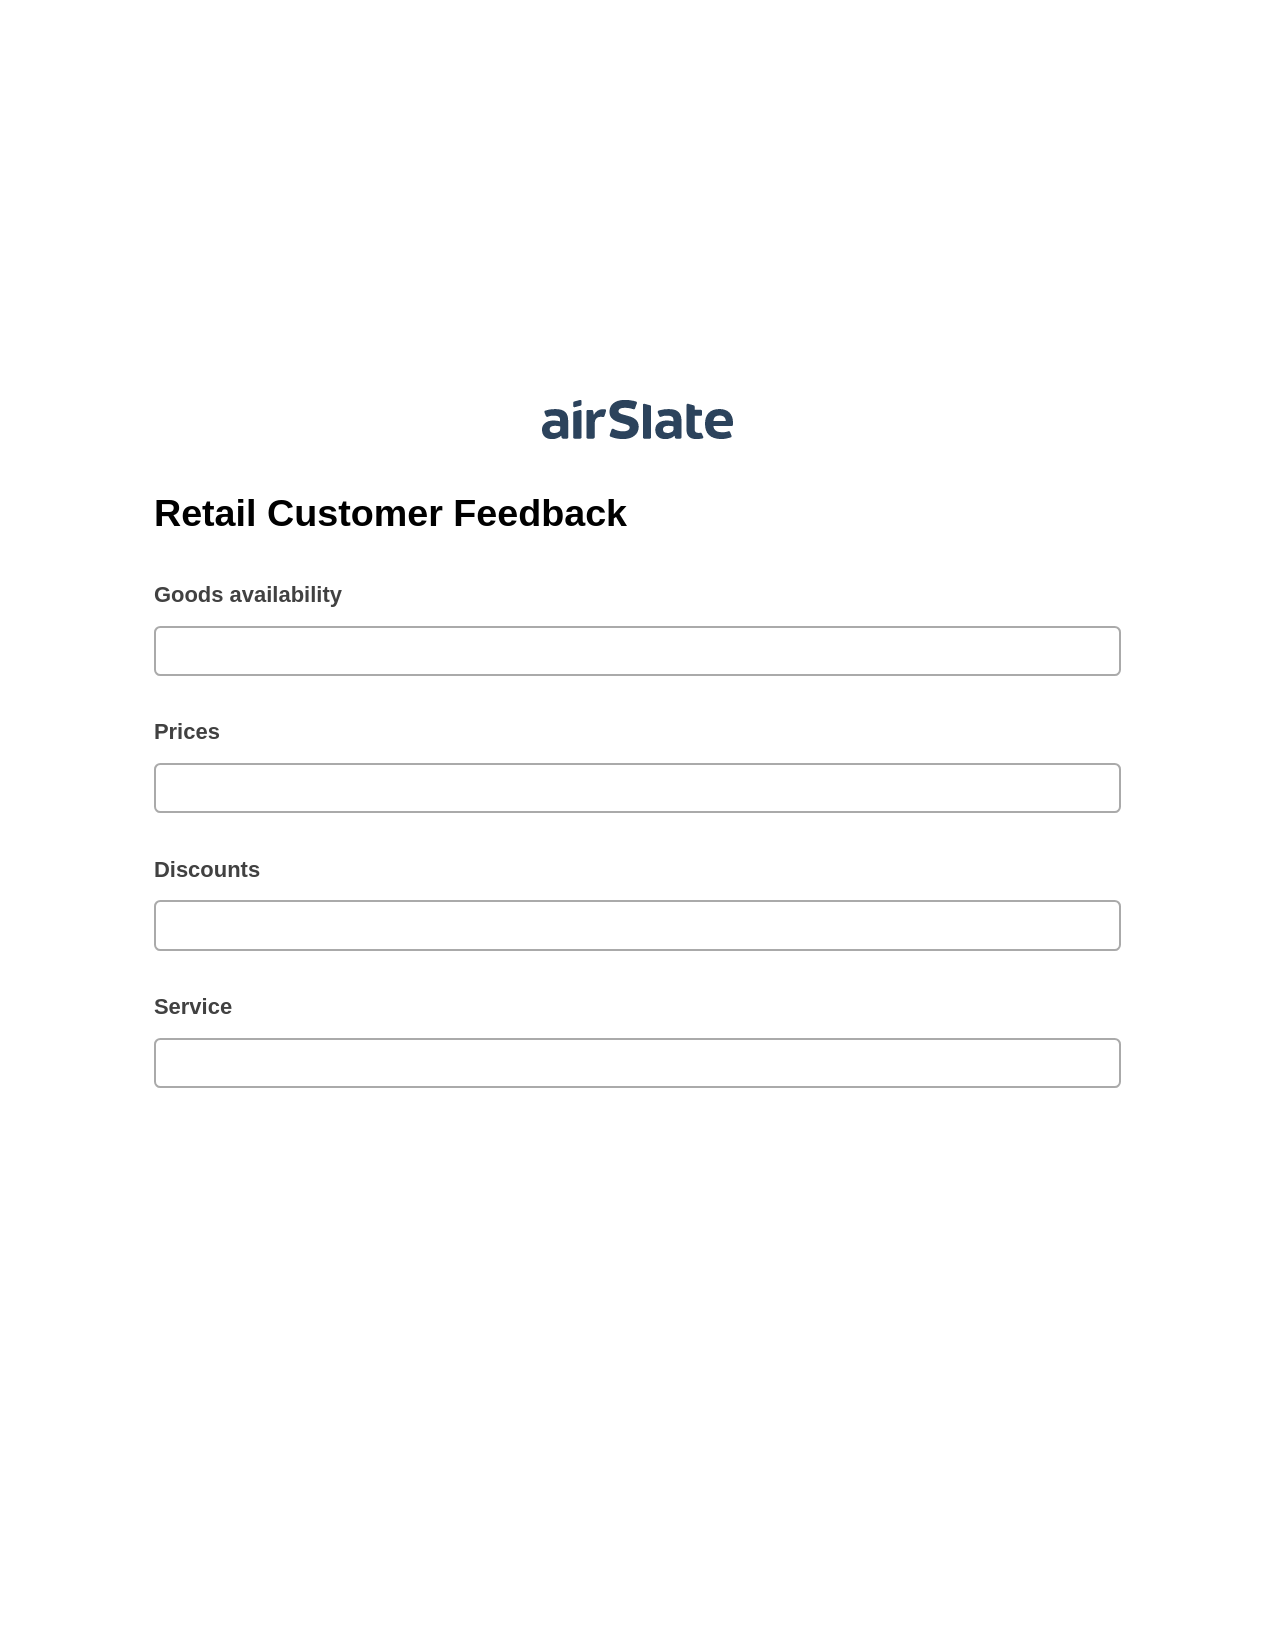 Multirole Retail Customer Feedback Pre-fill Dropdowns from CSV File Bot, Create NetSuite Records Bot, Post-finish Document Bot